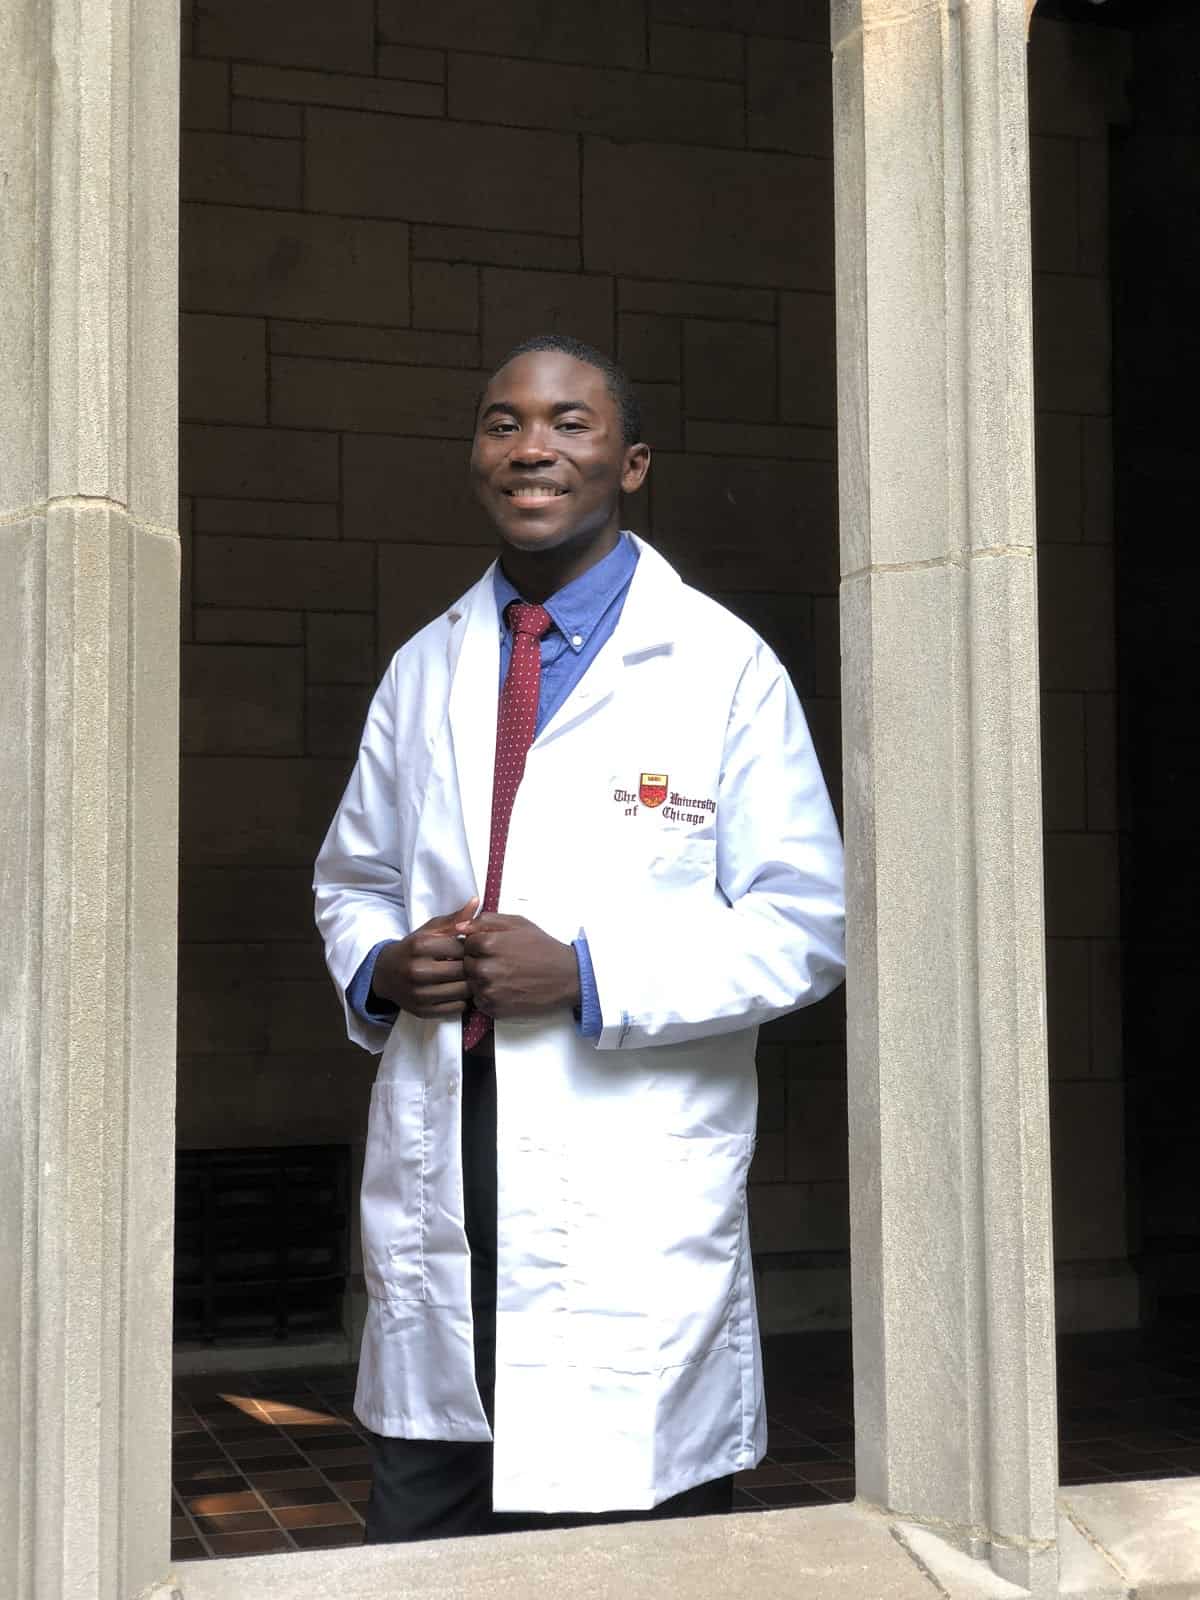 How I Got Accepted to University of Chicago School of Medicine | Atlantis